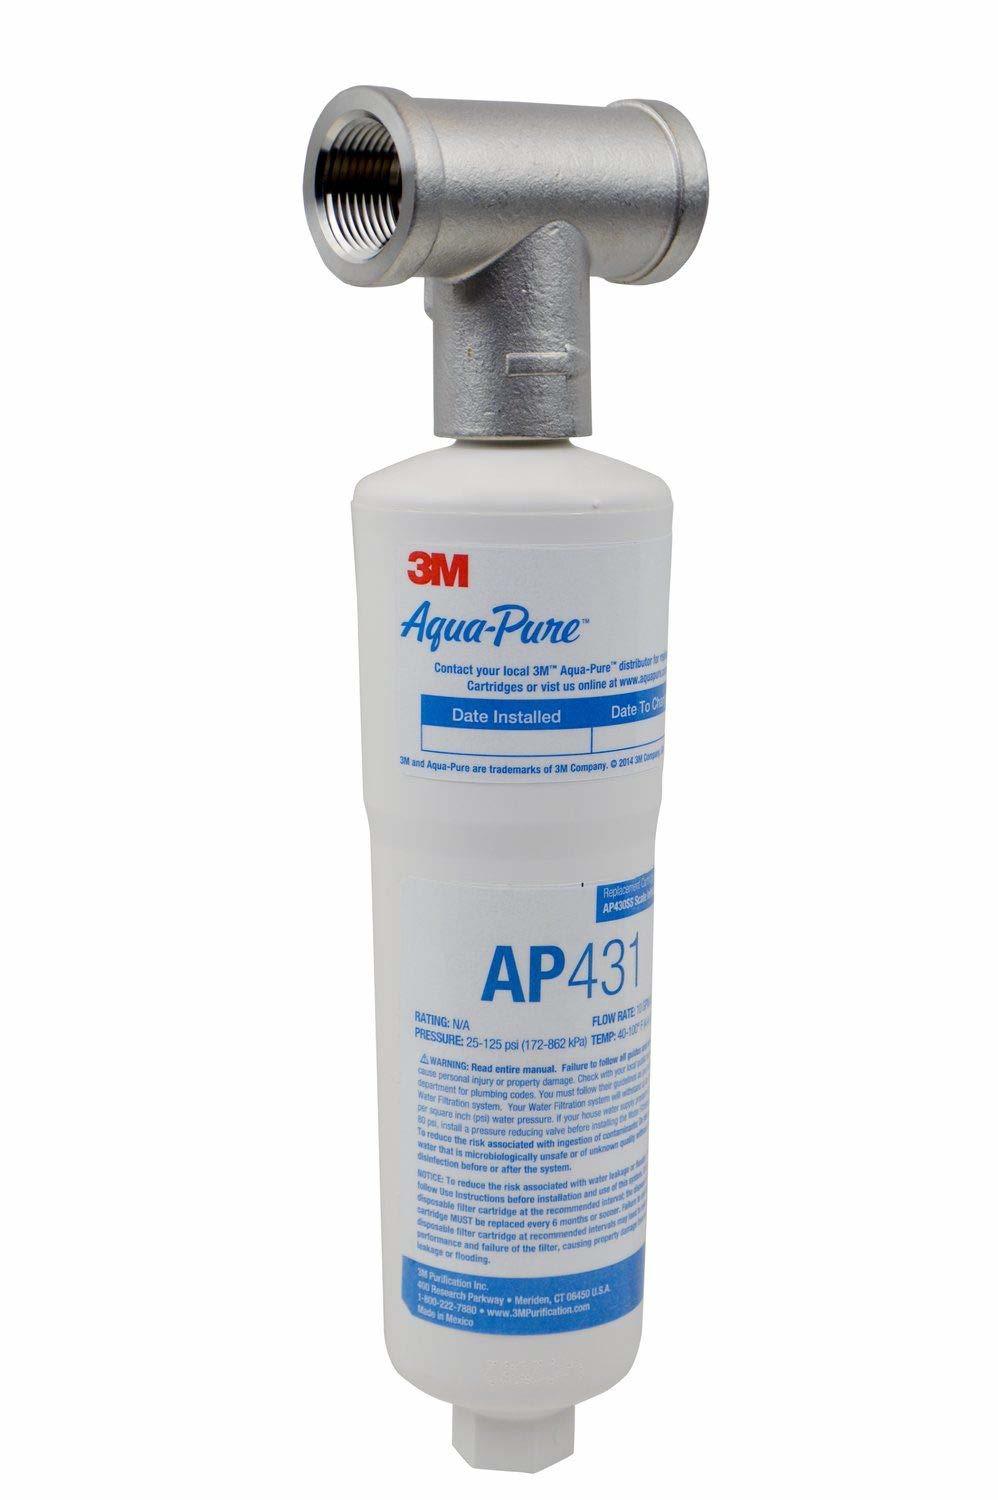 Scale Buildup On Hot Water Heaters And Boilers Is Prevented By The 3M Aqua-Pure - $128.92